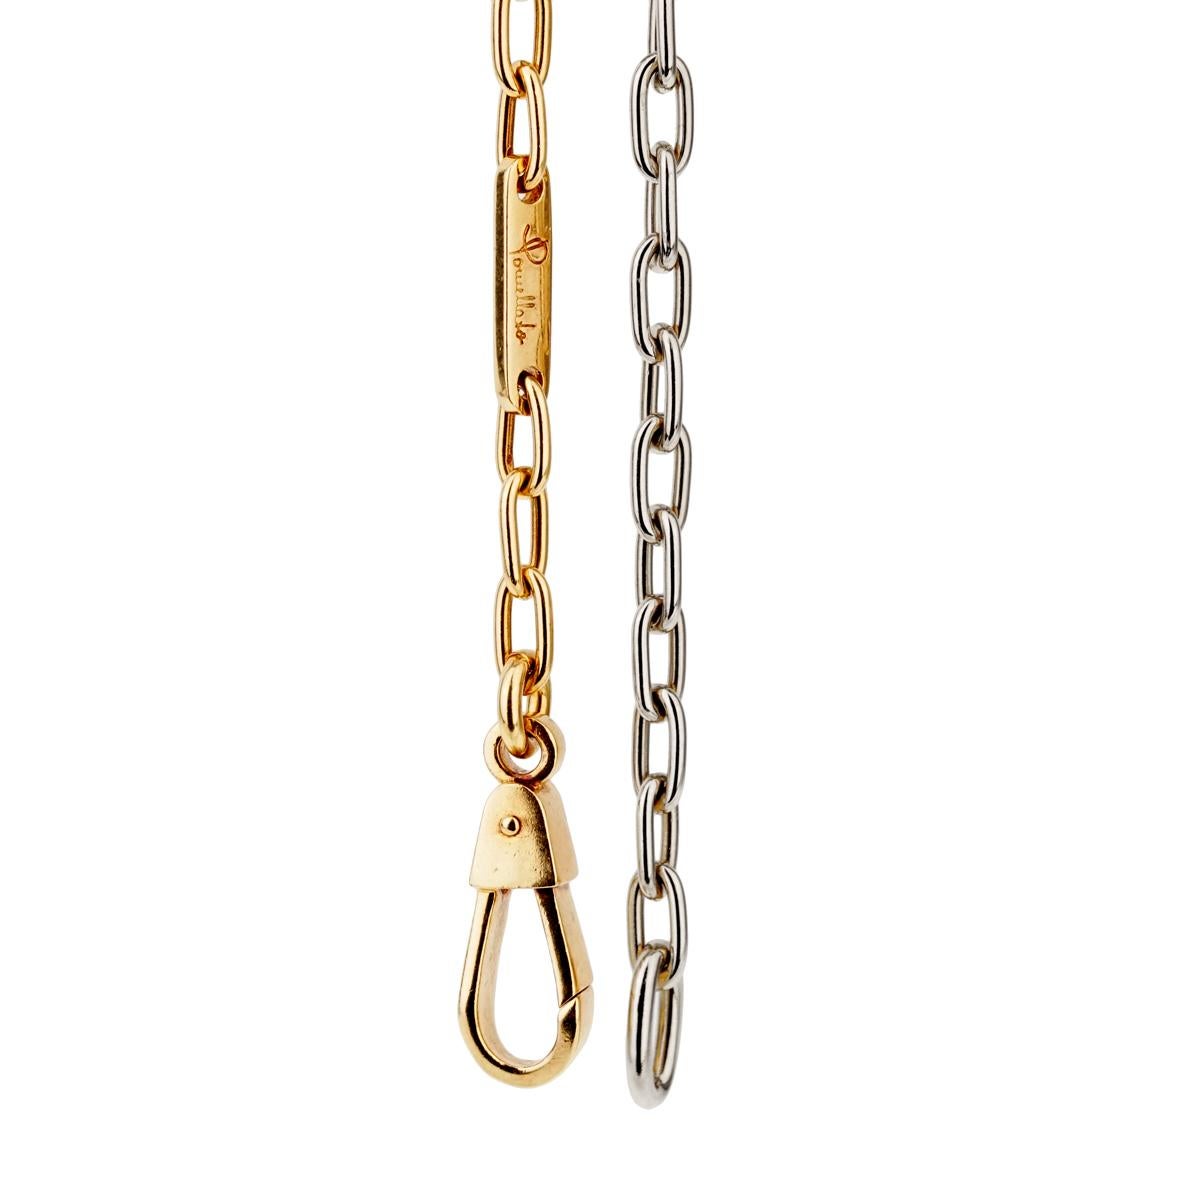 A chic Pomellato necklace featuring a 2 toned chain link motif, 1/2 of the necklace is 18k white gold while the other half is 18k yellow gold. The necklace graduates from .15